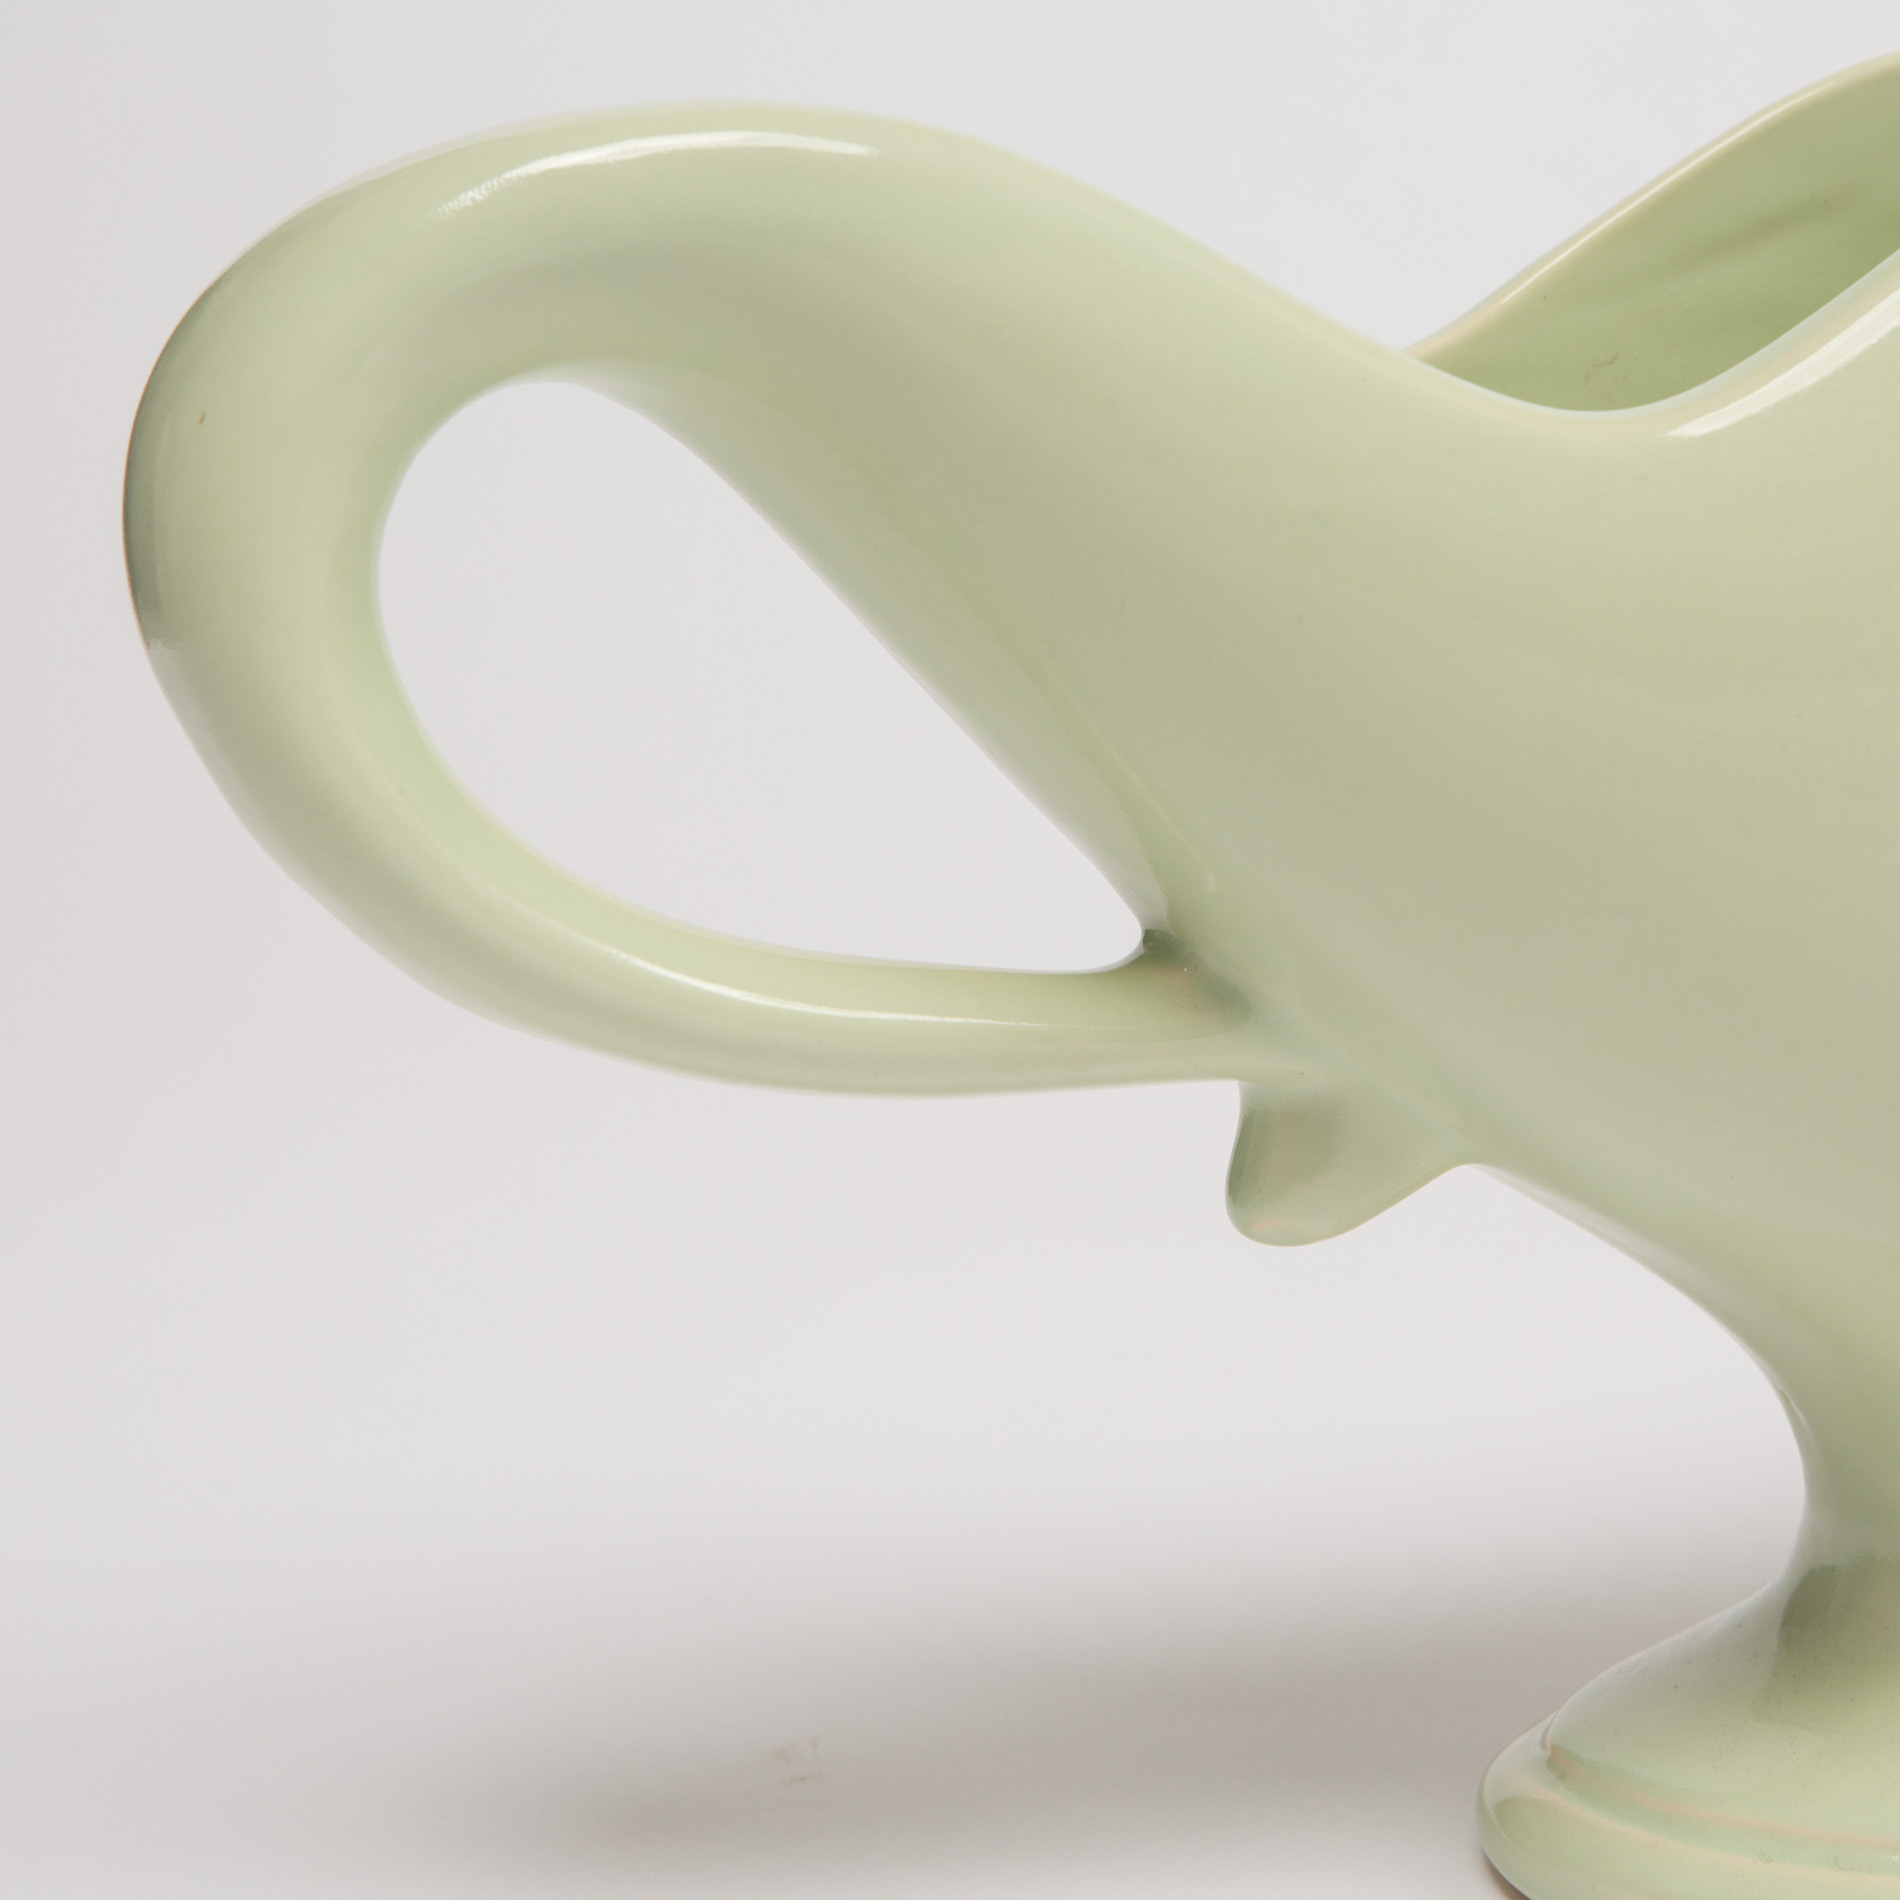 The image for Lime Green Vase00006